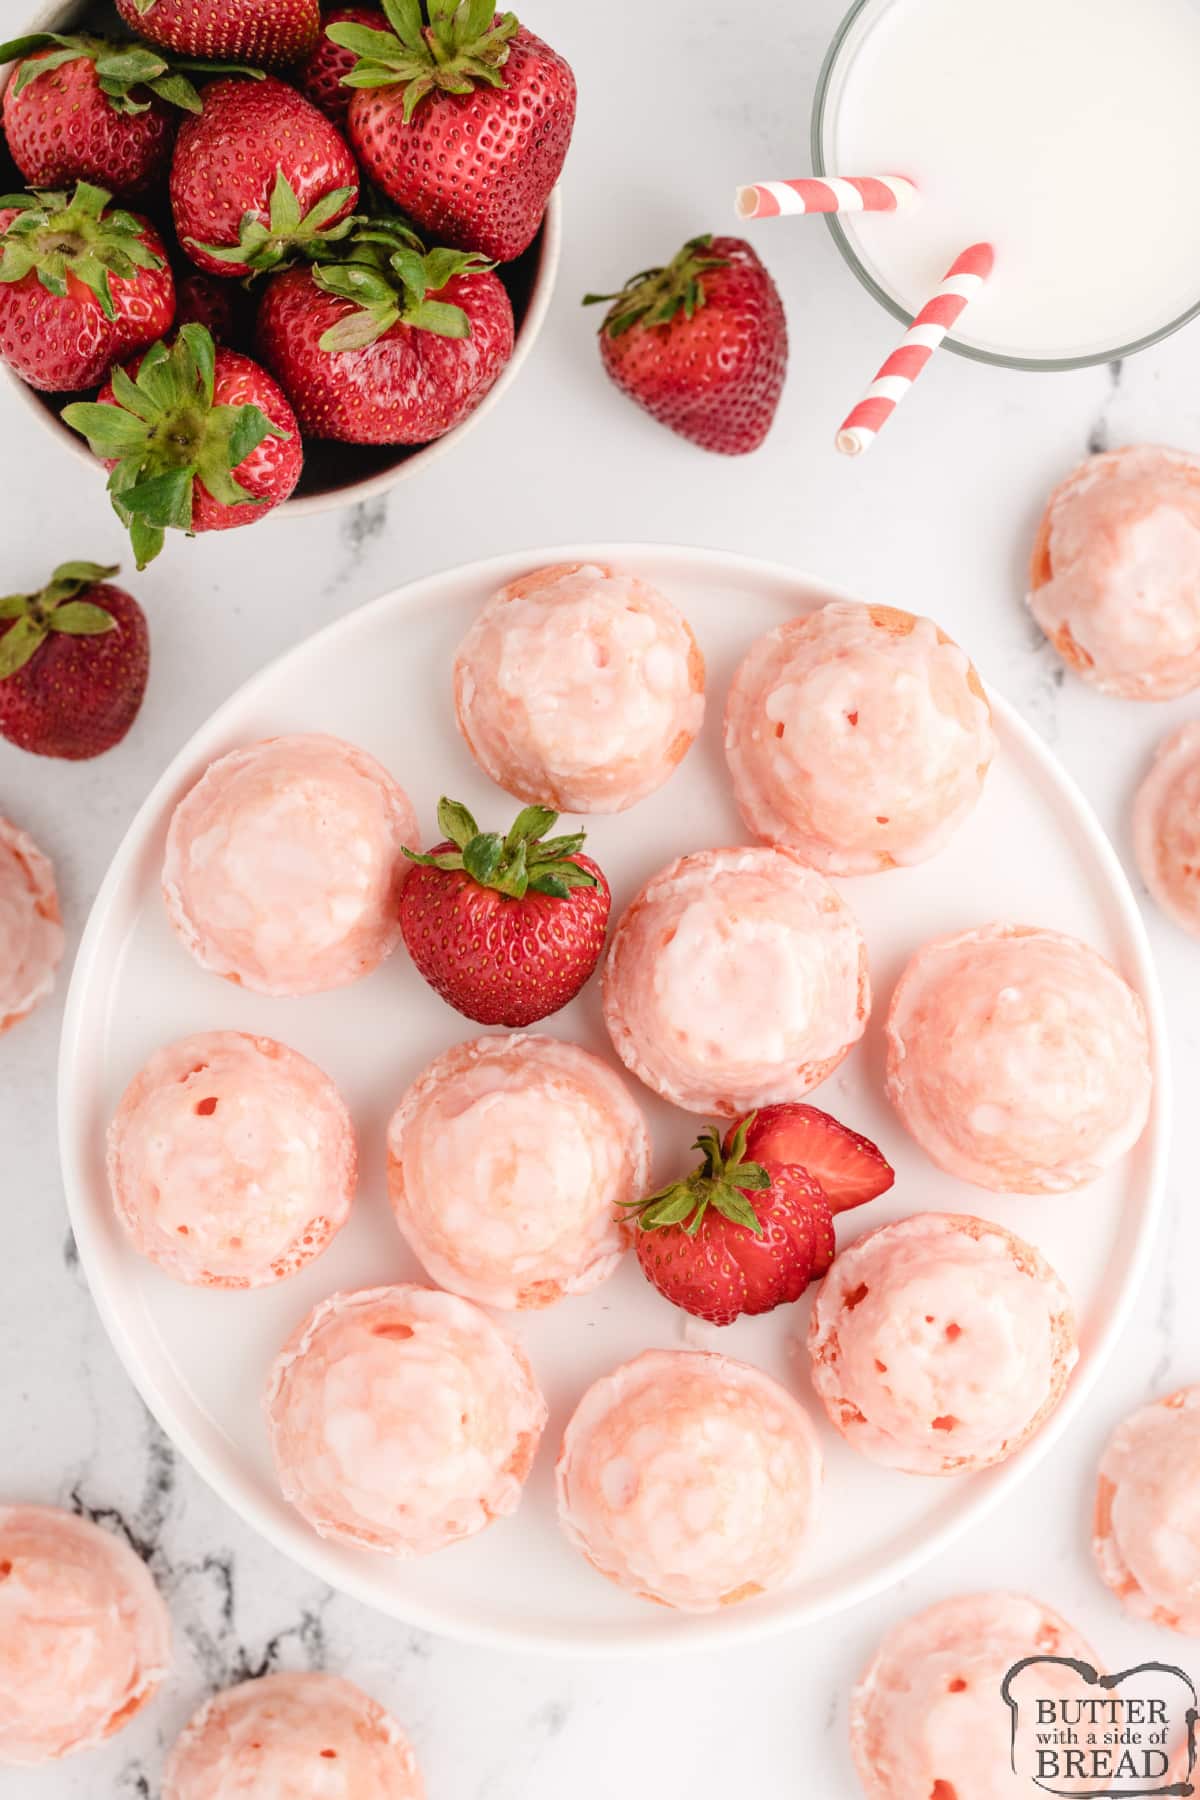 Glazed Mini Strawberry Cupcakes are delicious bite-sized treats that start with a strawberry cake mix. The easy strawberry glaze soaks into the bottoms to make these little cupcakes even more incredible.